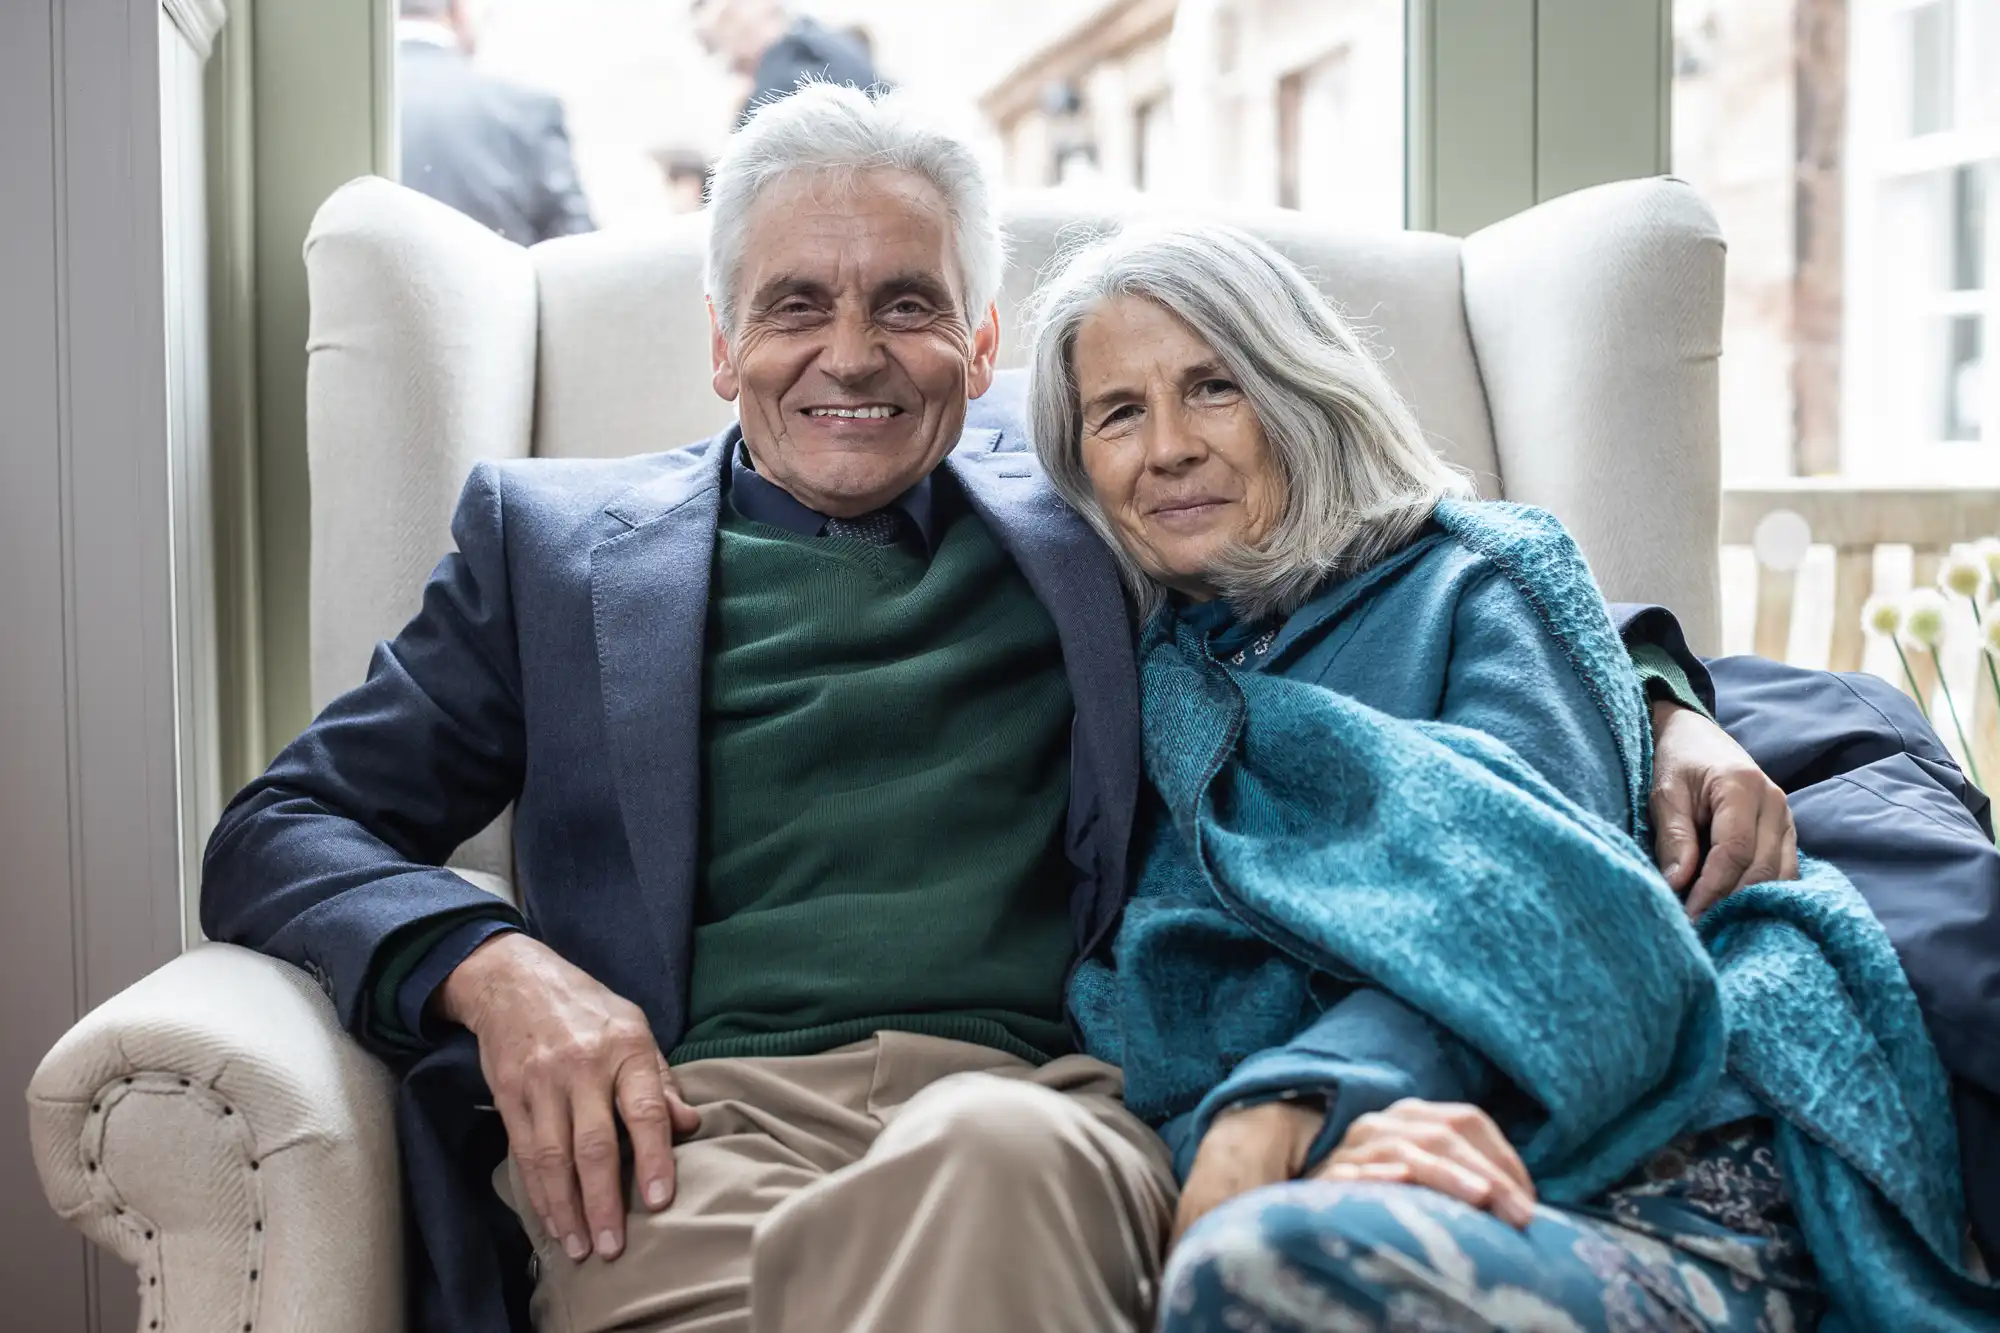 An elderly man and woman sit closely together on an armchair, smiling warmly at the camera. The woman is wrapped in a blue blanket, and they appear to be in a well-lit indoor setting.